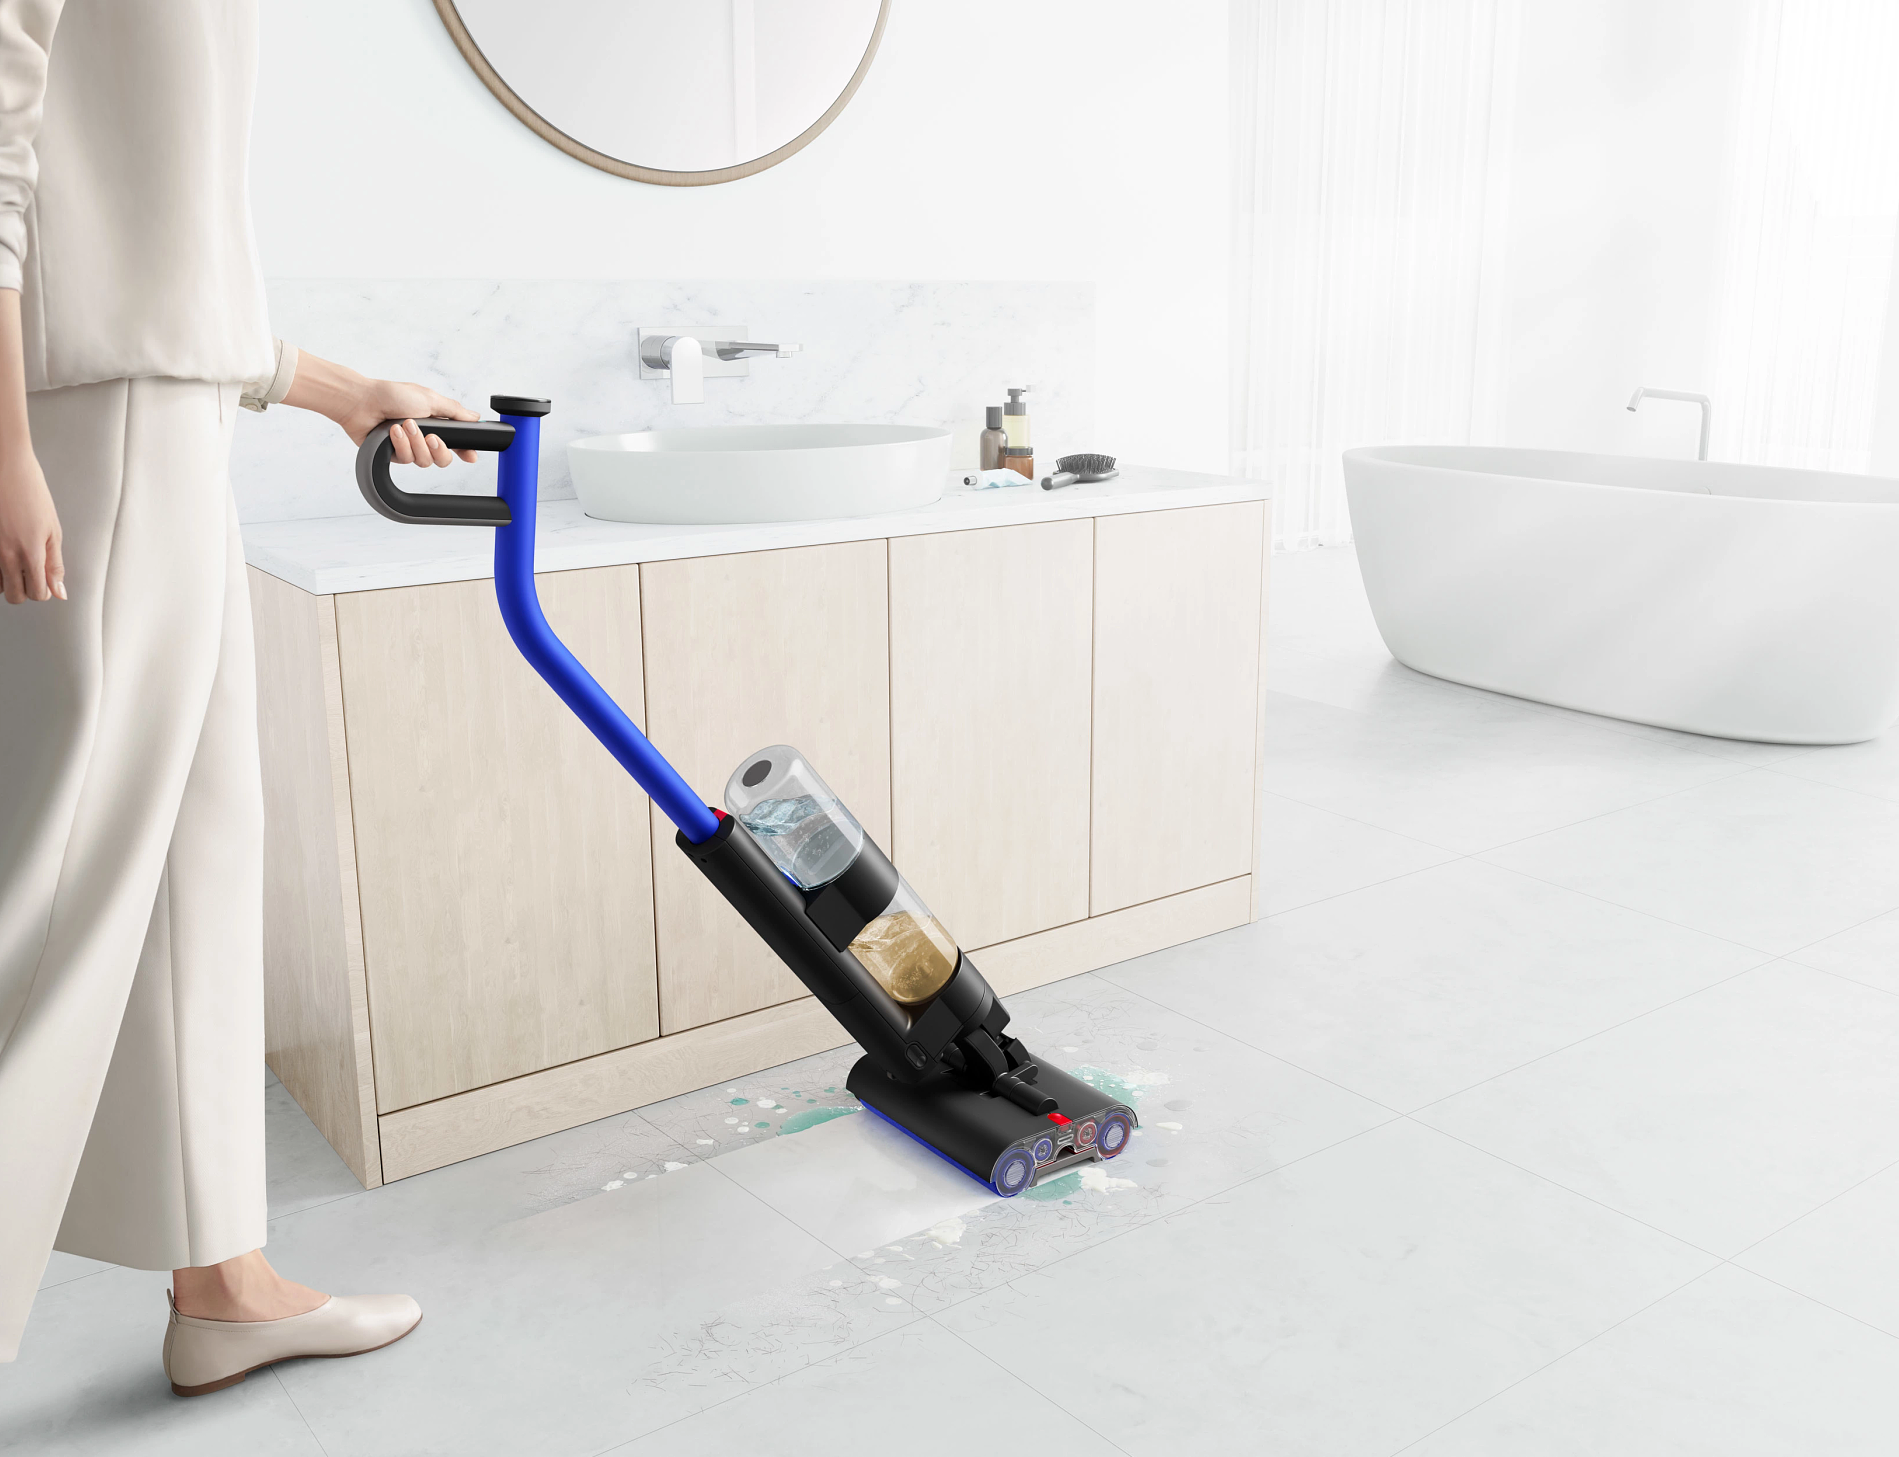 a person pictured pushing the dyson wash g1 around a bathroom